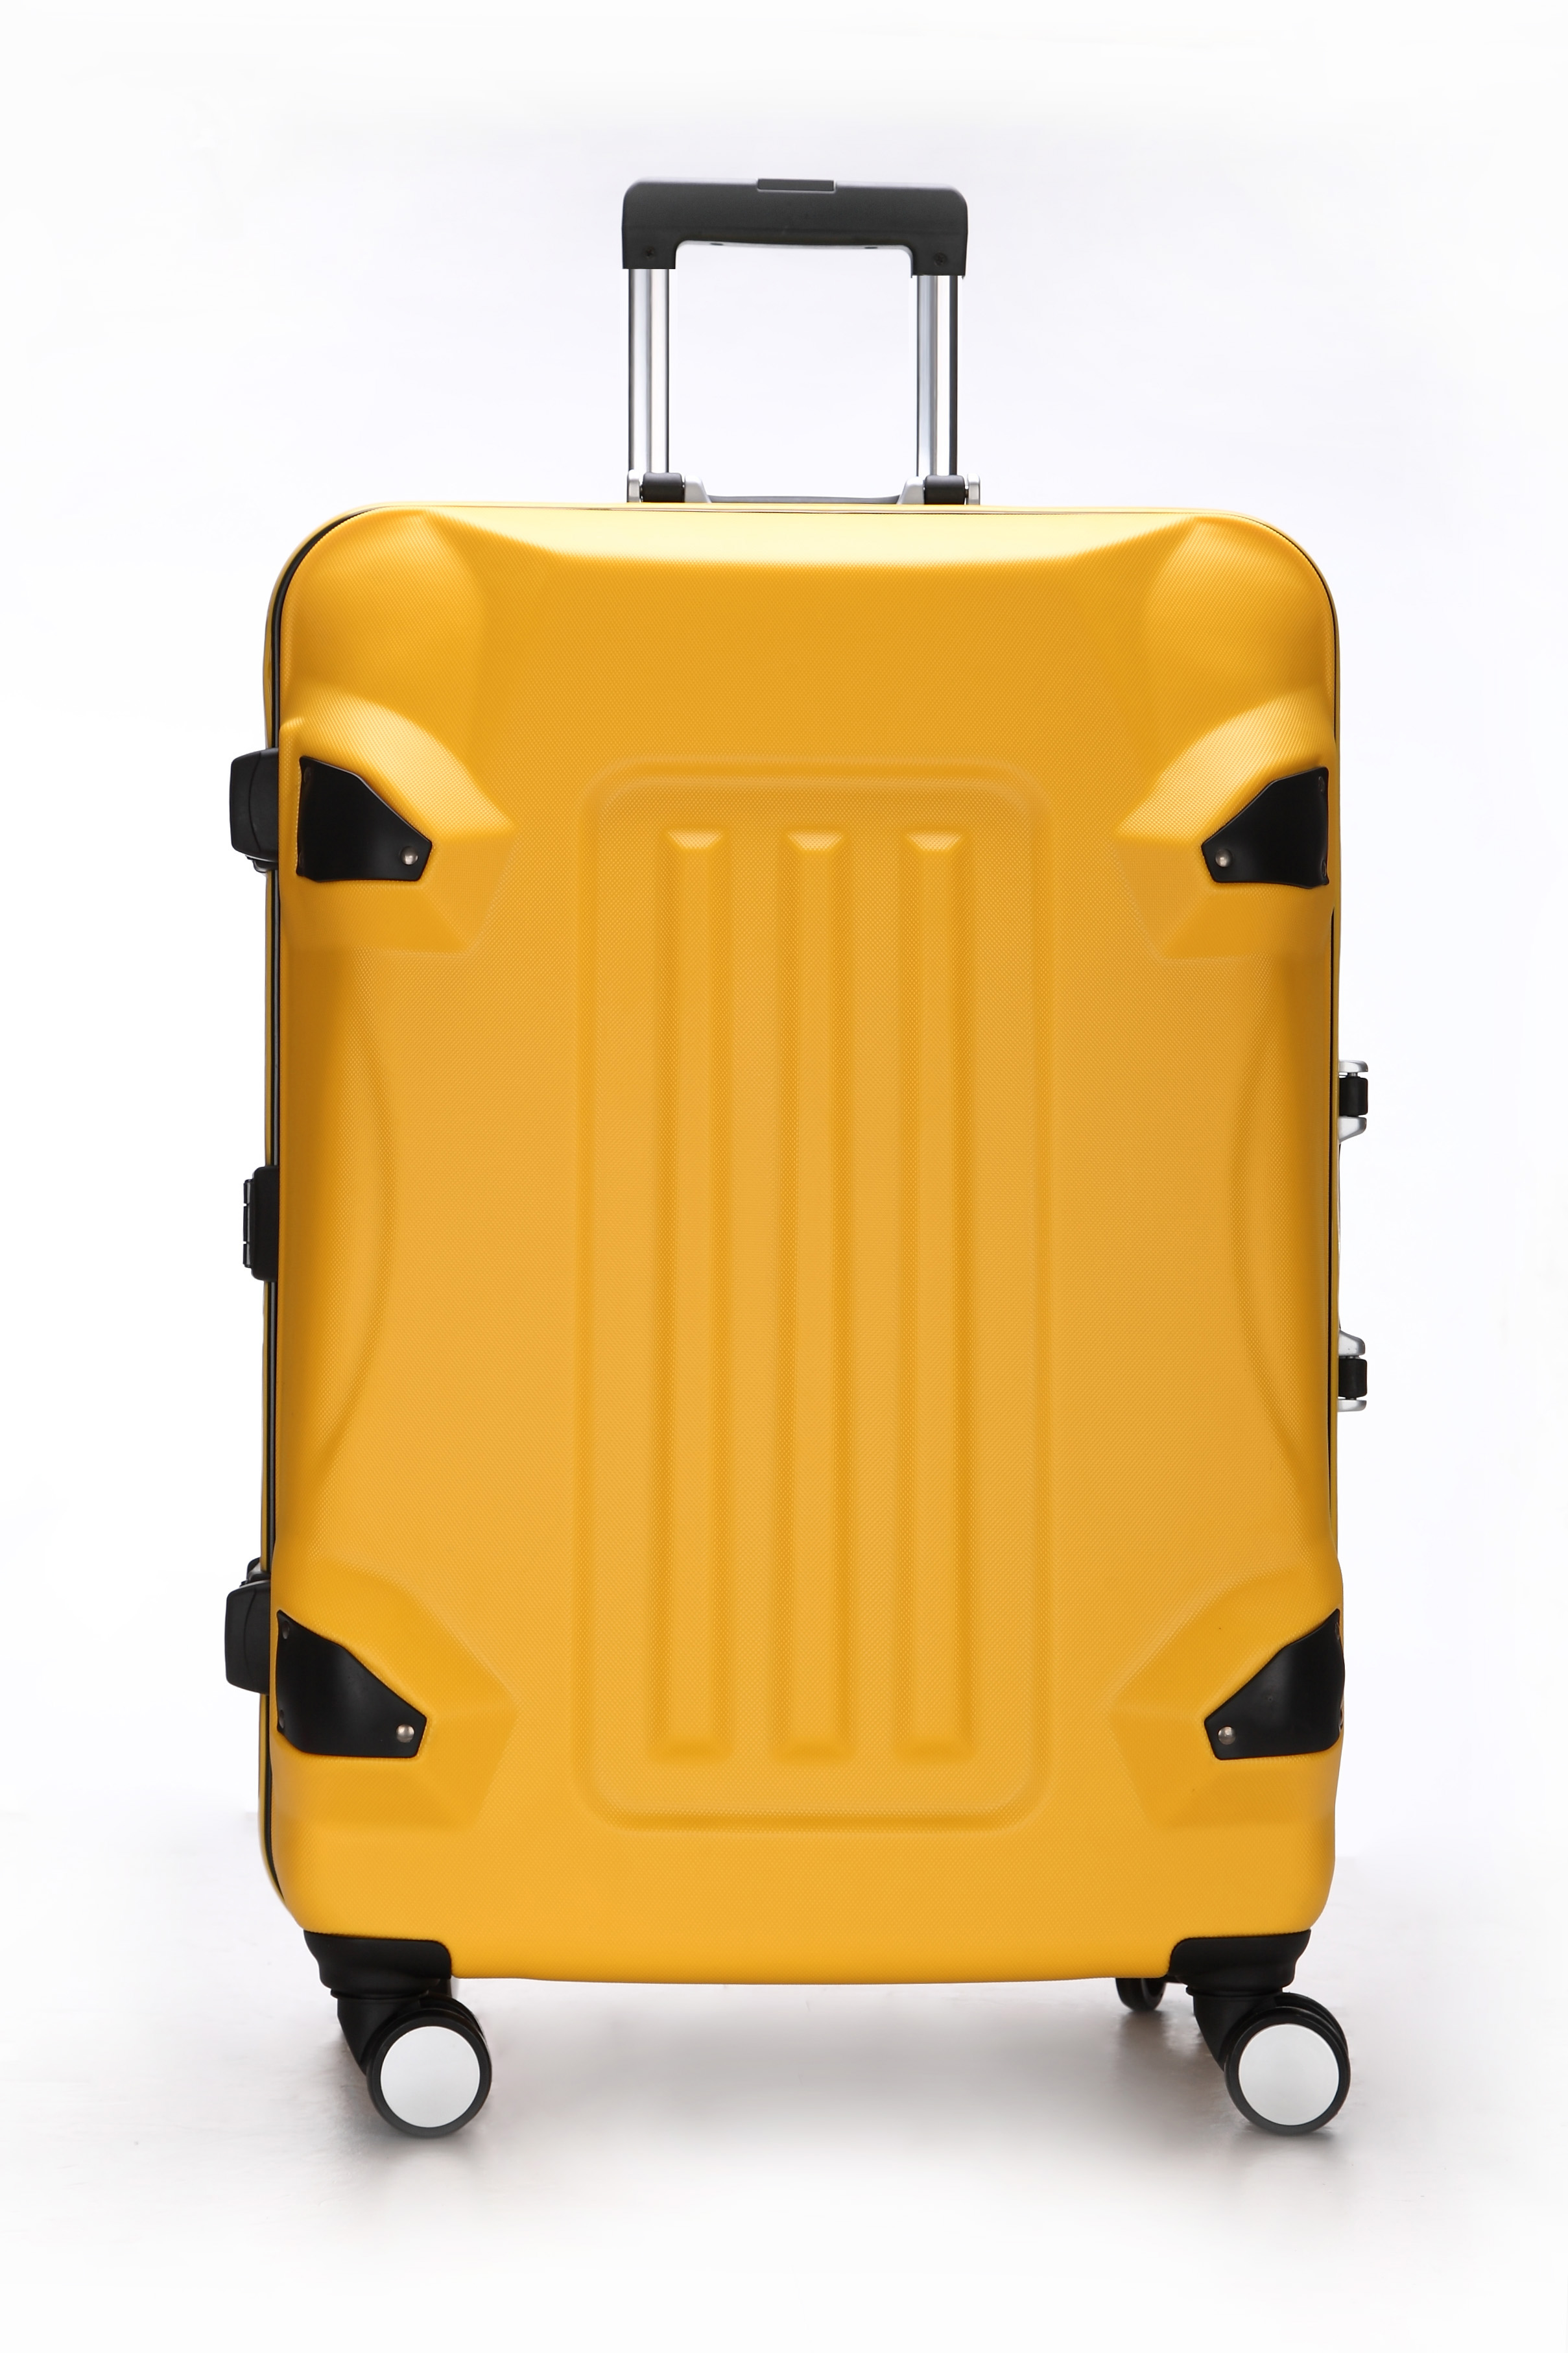 yanteng best carry on luggage with popular design